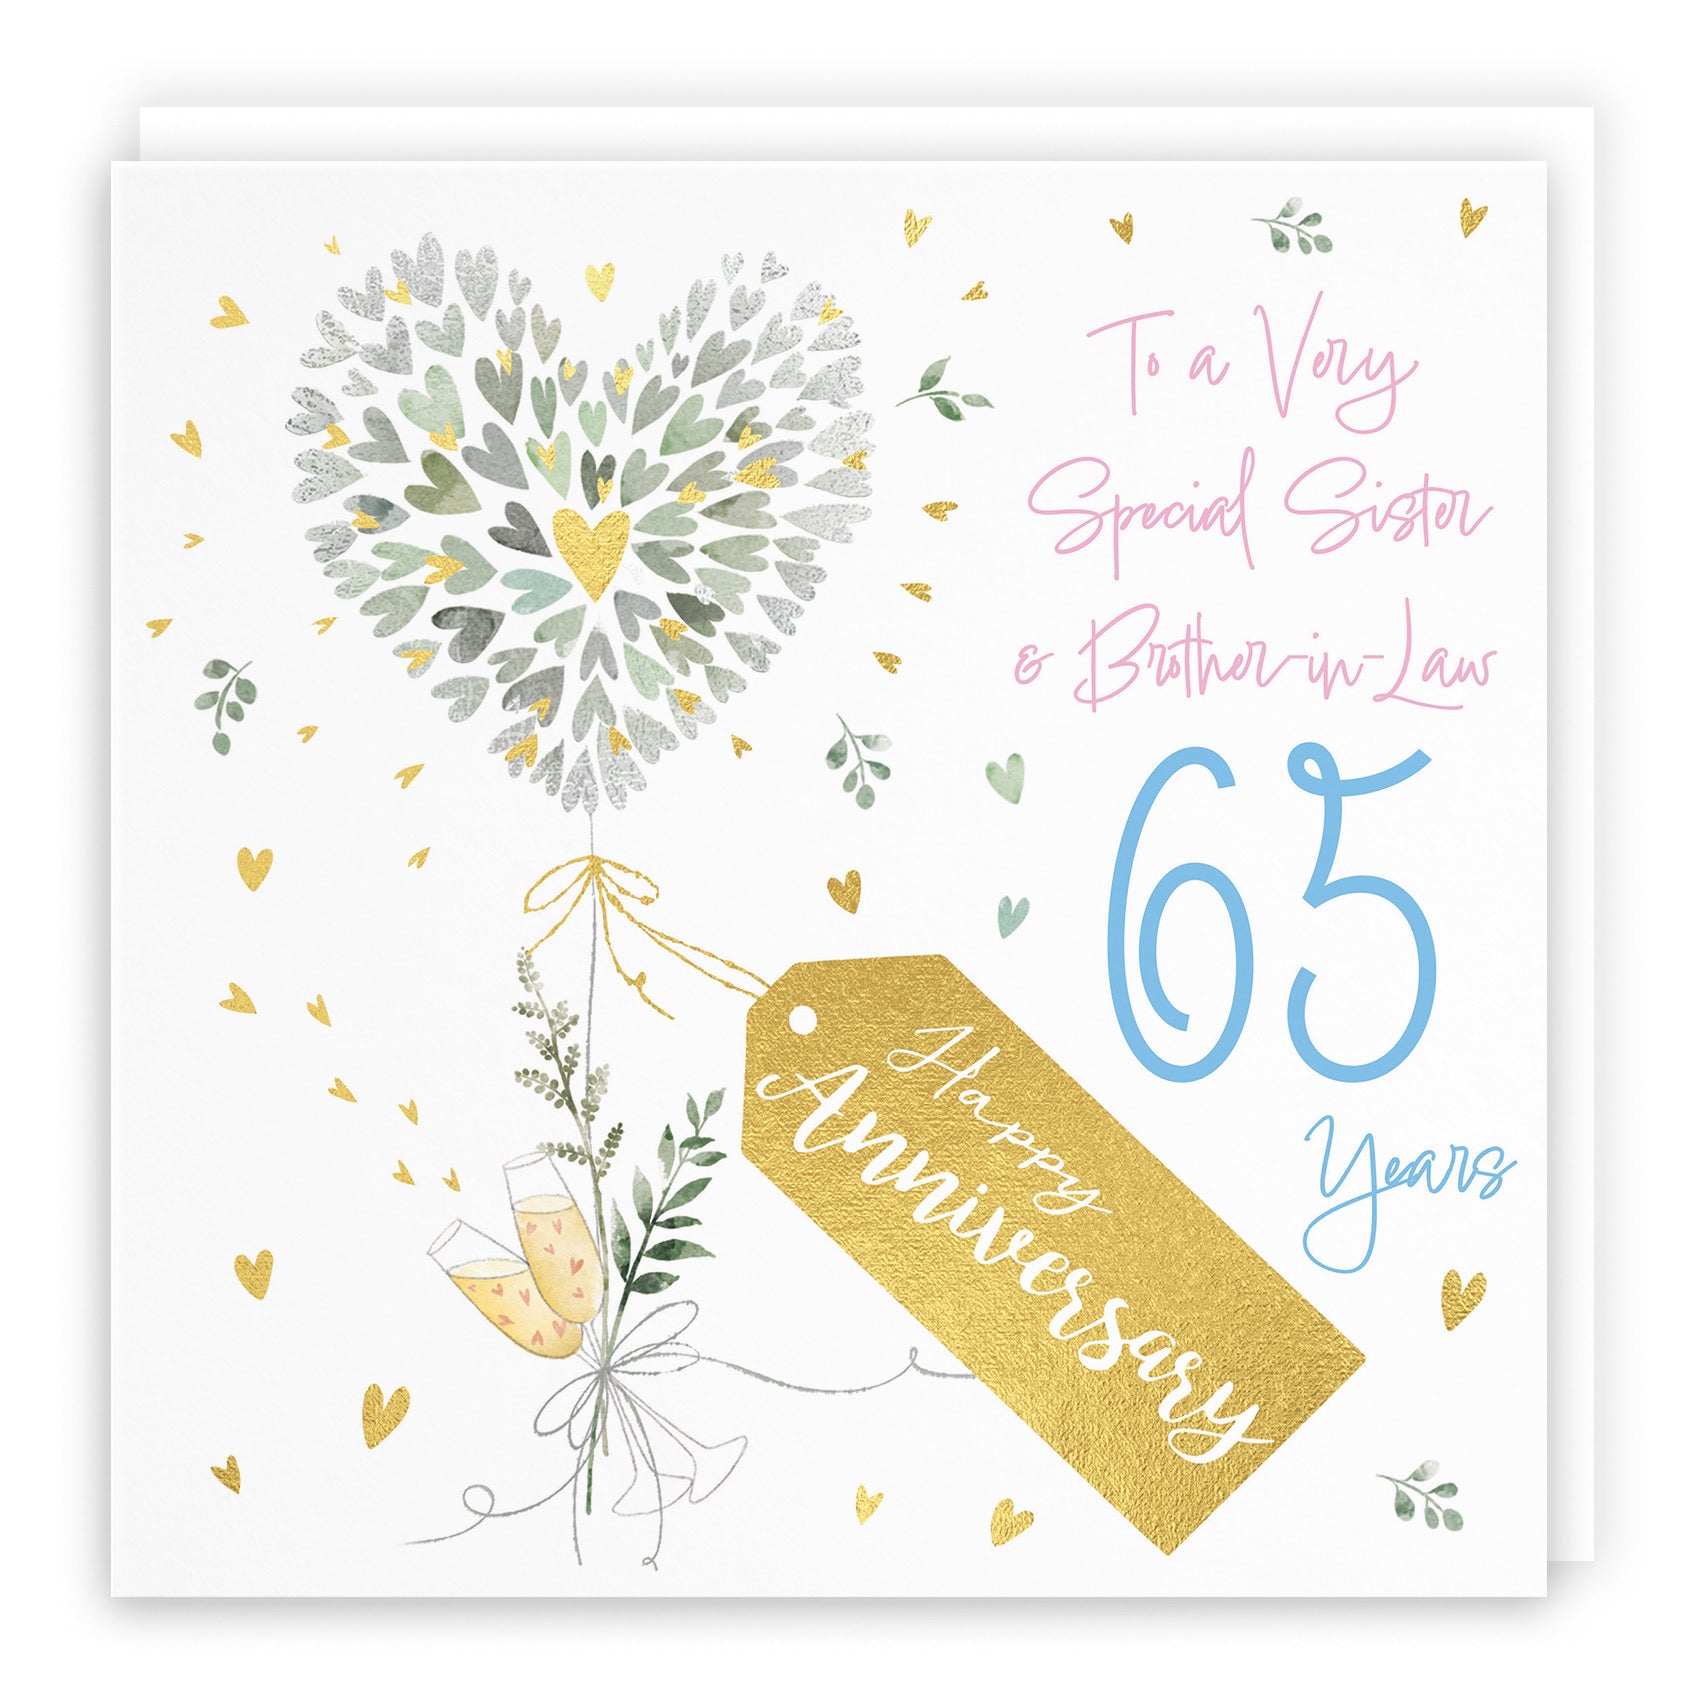 Sister And Brother-in-Law 65th Anniversary Card Contemporary Hearts Milo's Gallery - Default Title (B0CKJ4BGJT)